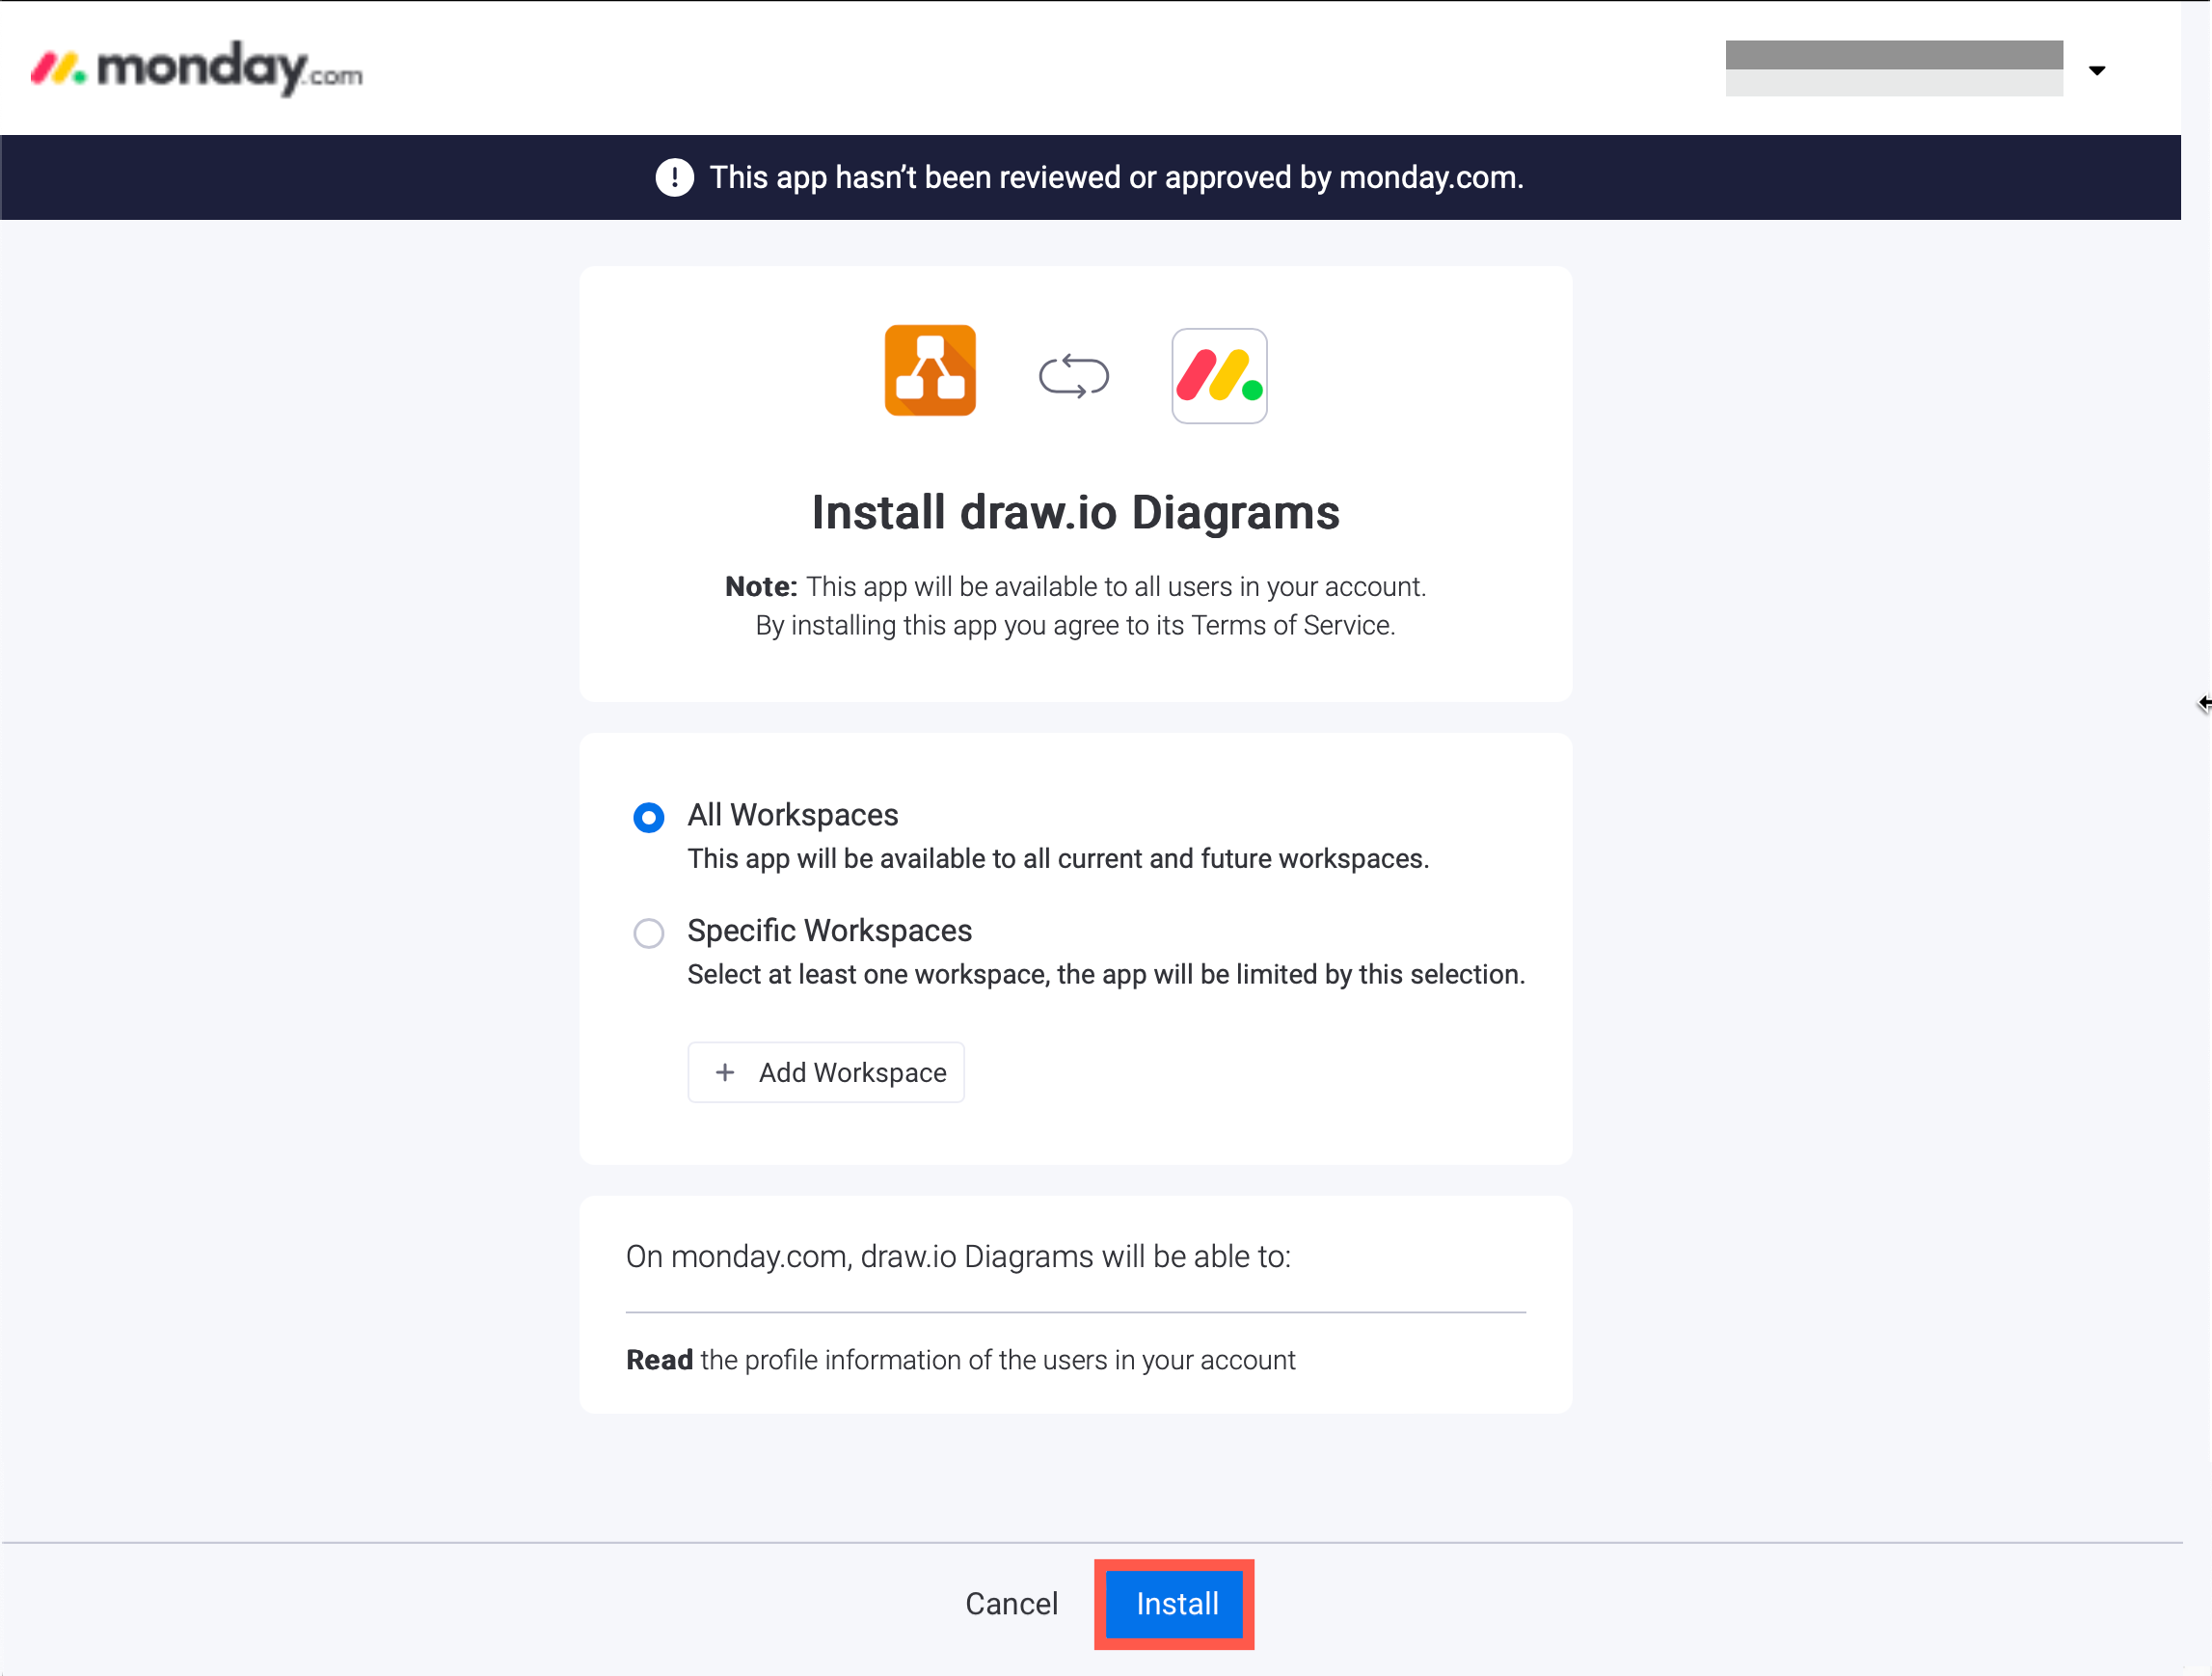 Install the draw.io integration for Monday in all Workspaces